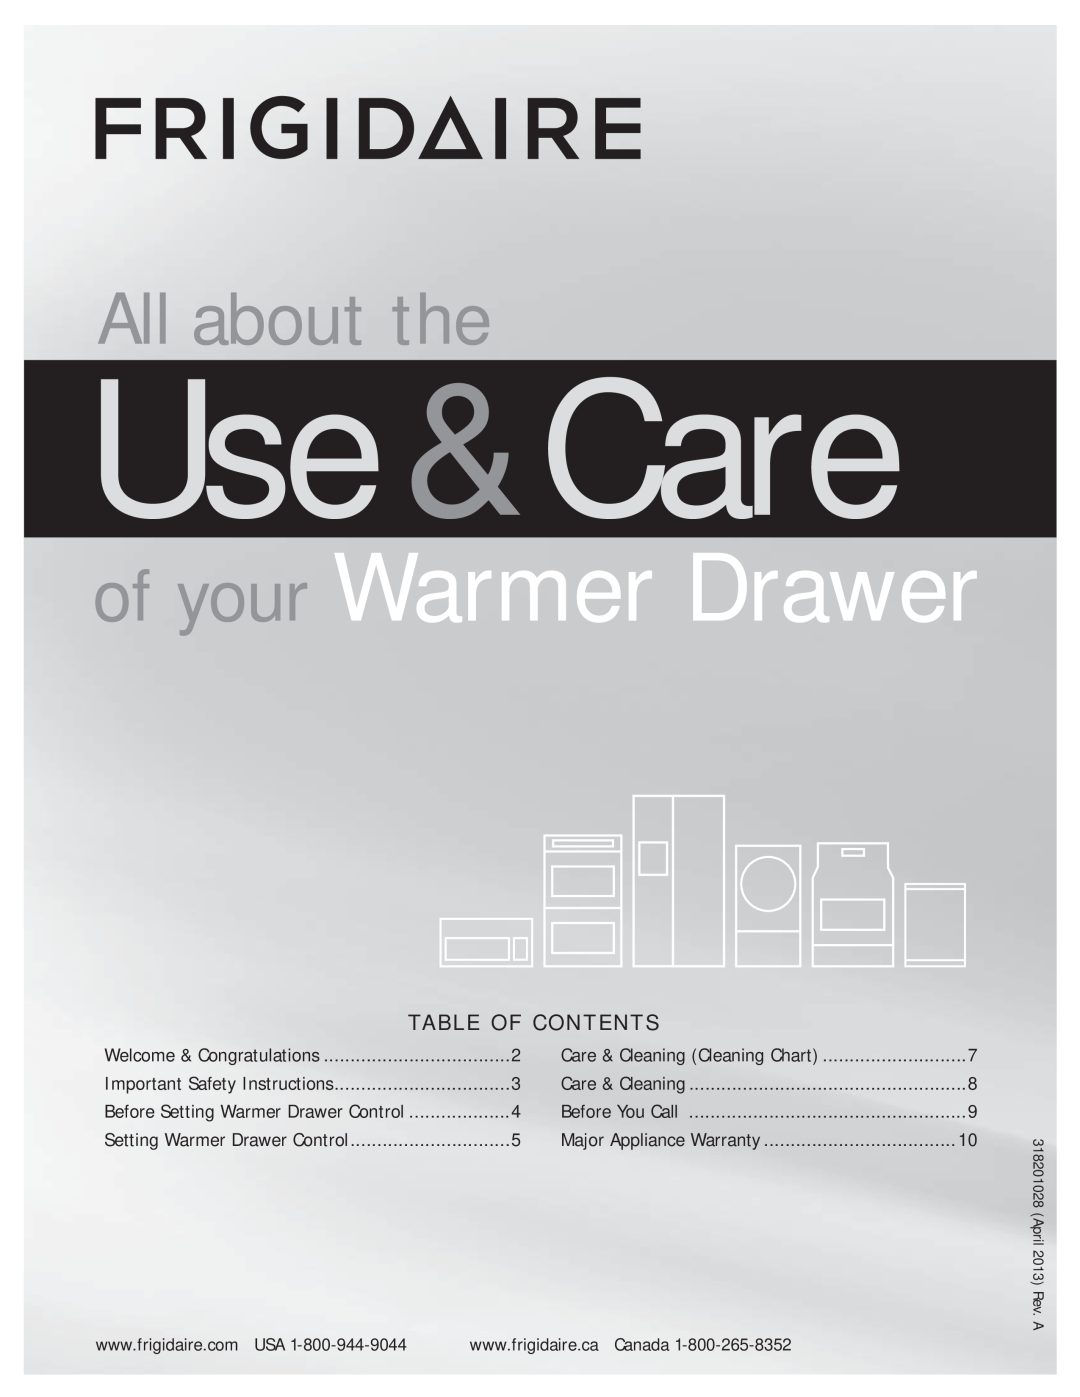 Frigidaire 318201028 important safety instructions Use &Care, of your Warmer Drawer, All about the, April 2013 Rev. A 